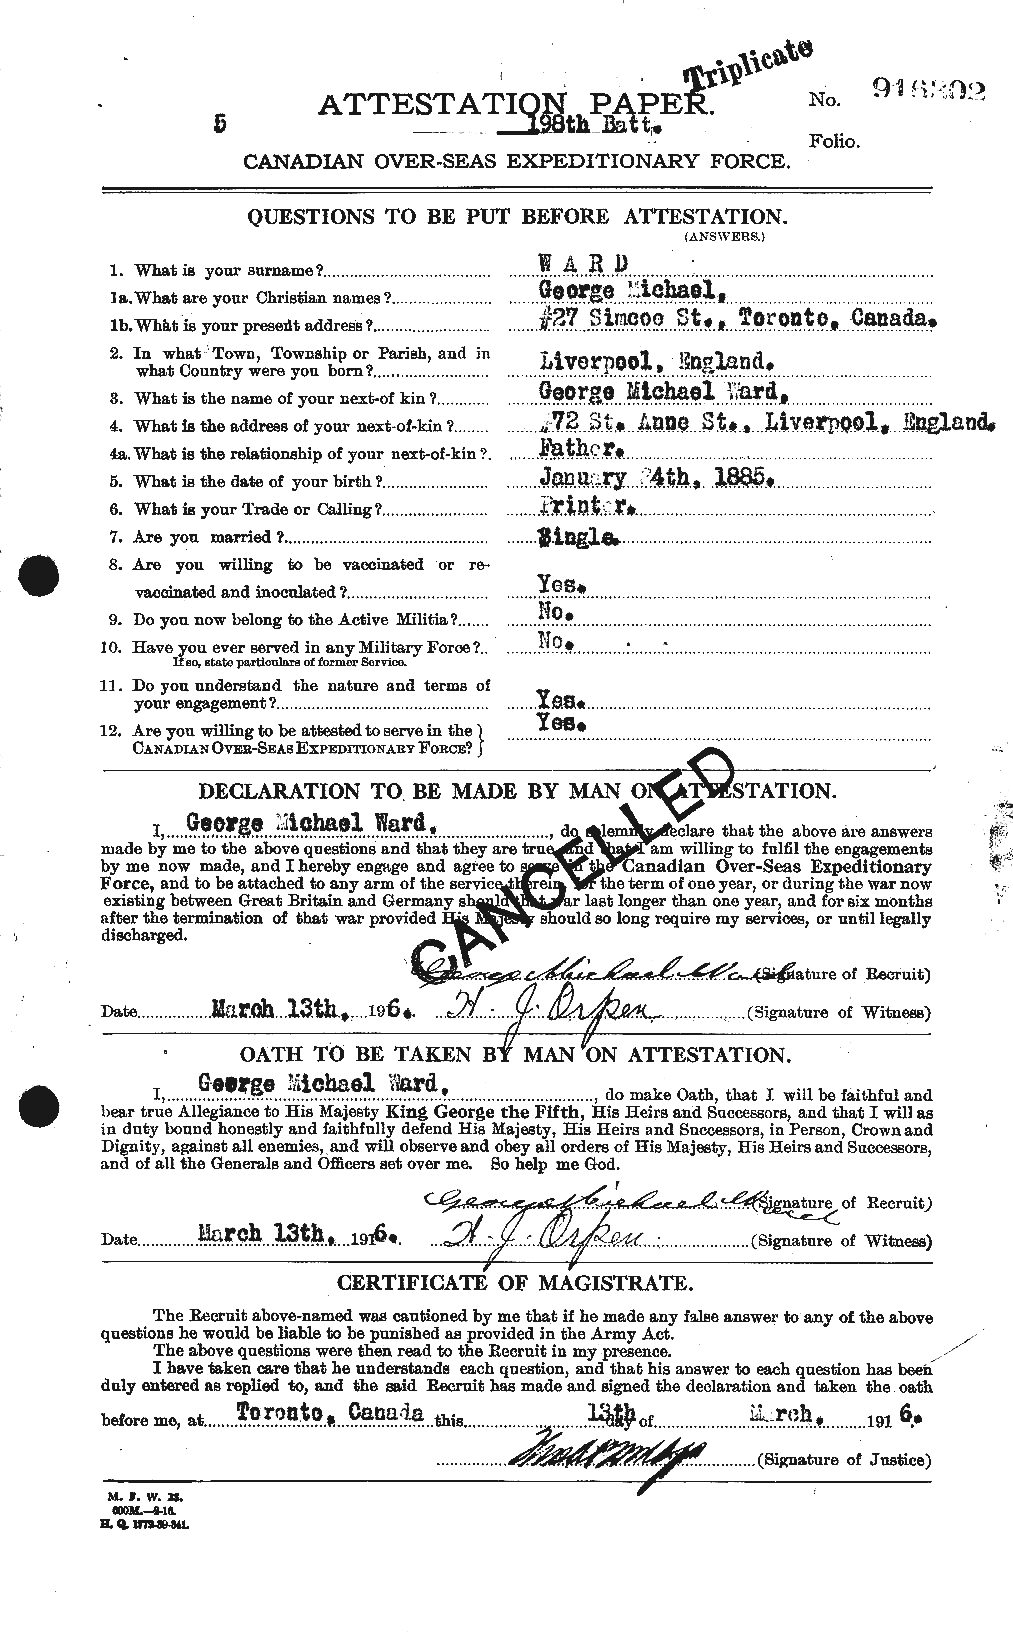 Personnel Records of the First World War - CEF 657780a